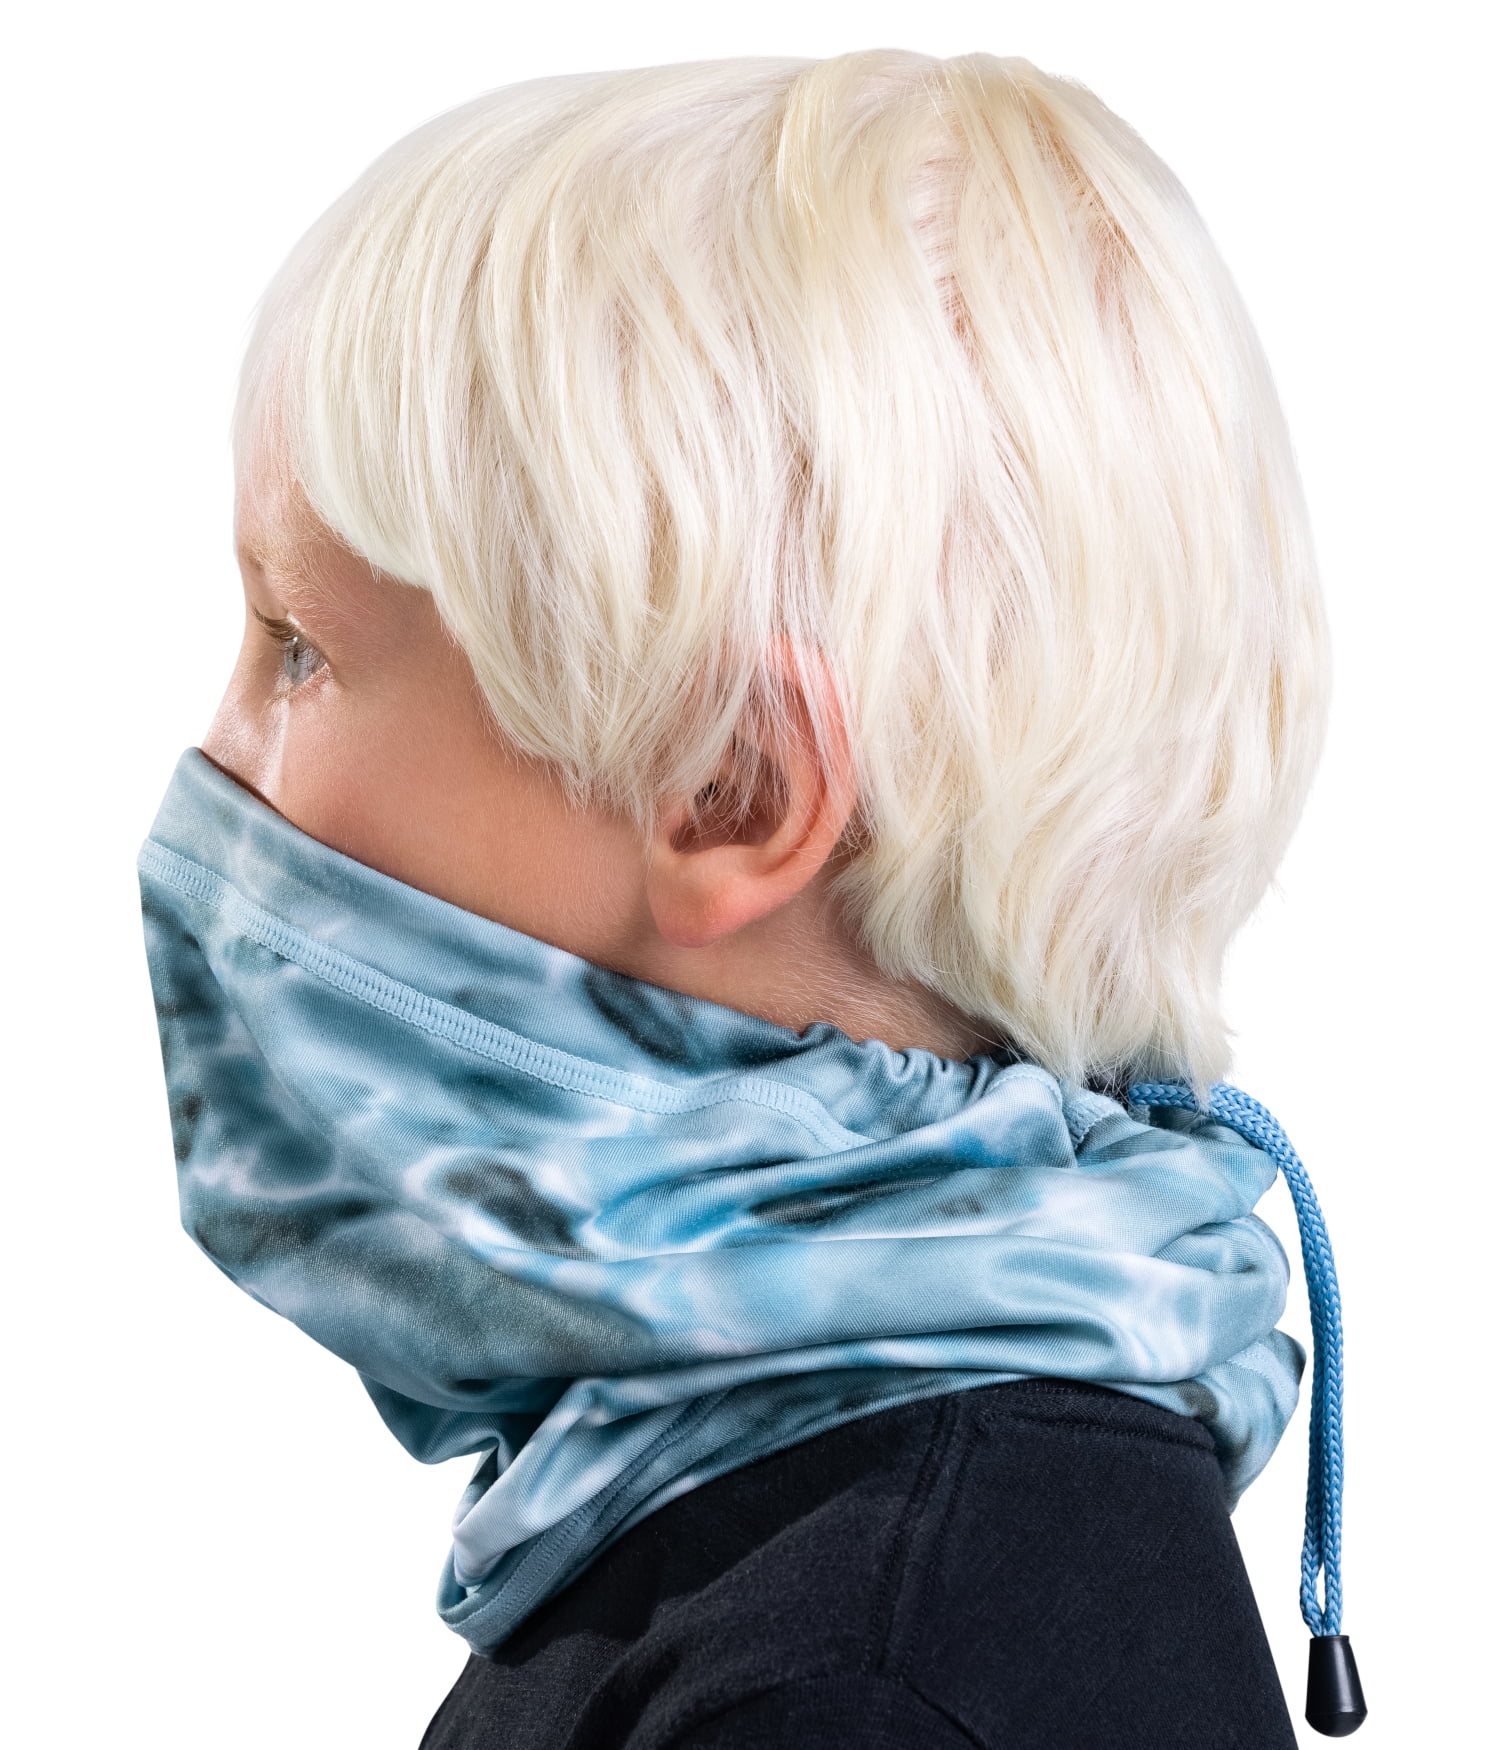 Face Mask Neck Gaiter Bandana Protection from Wind Sun Dust 